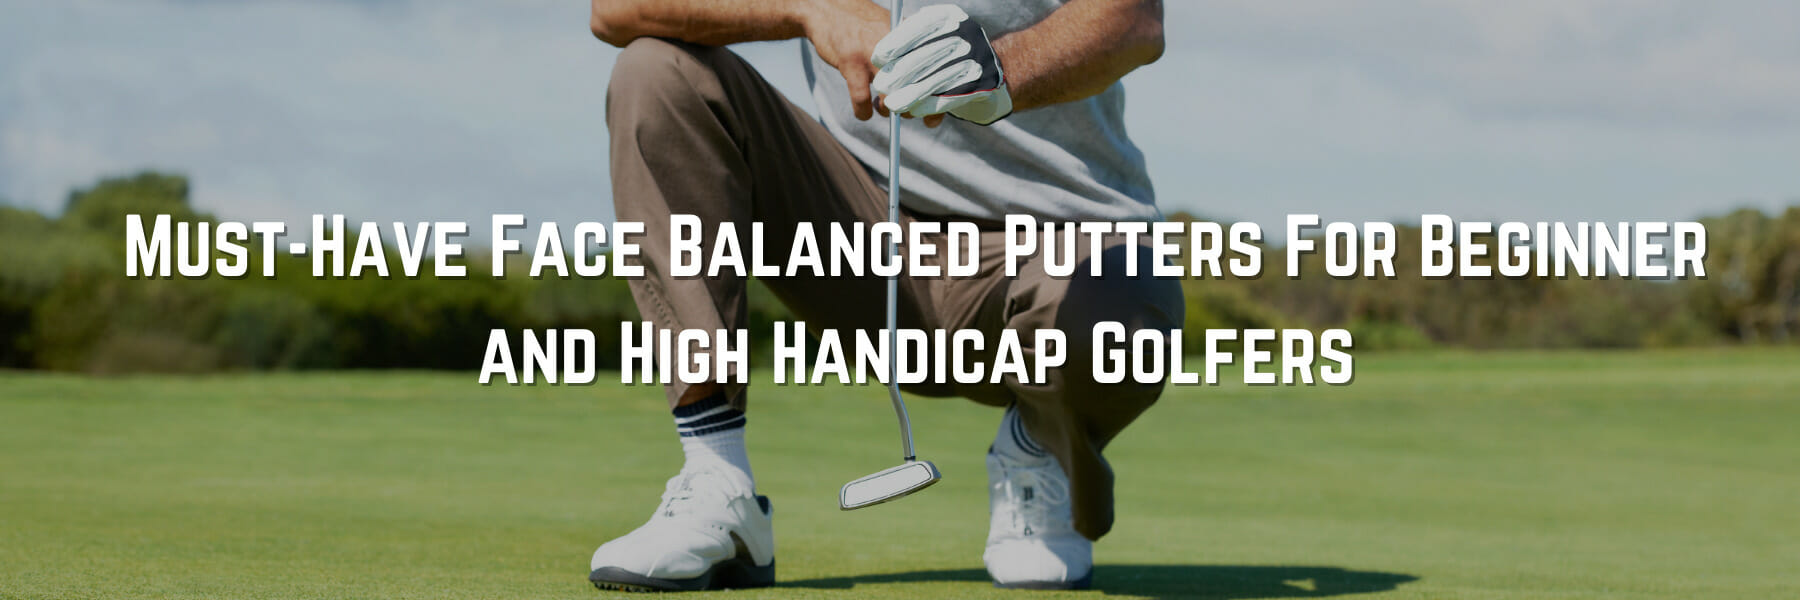 Must-Have Face Balanced Putters For Beginner and High Handicap Golfers